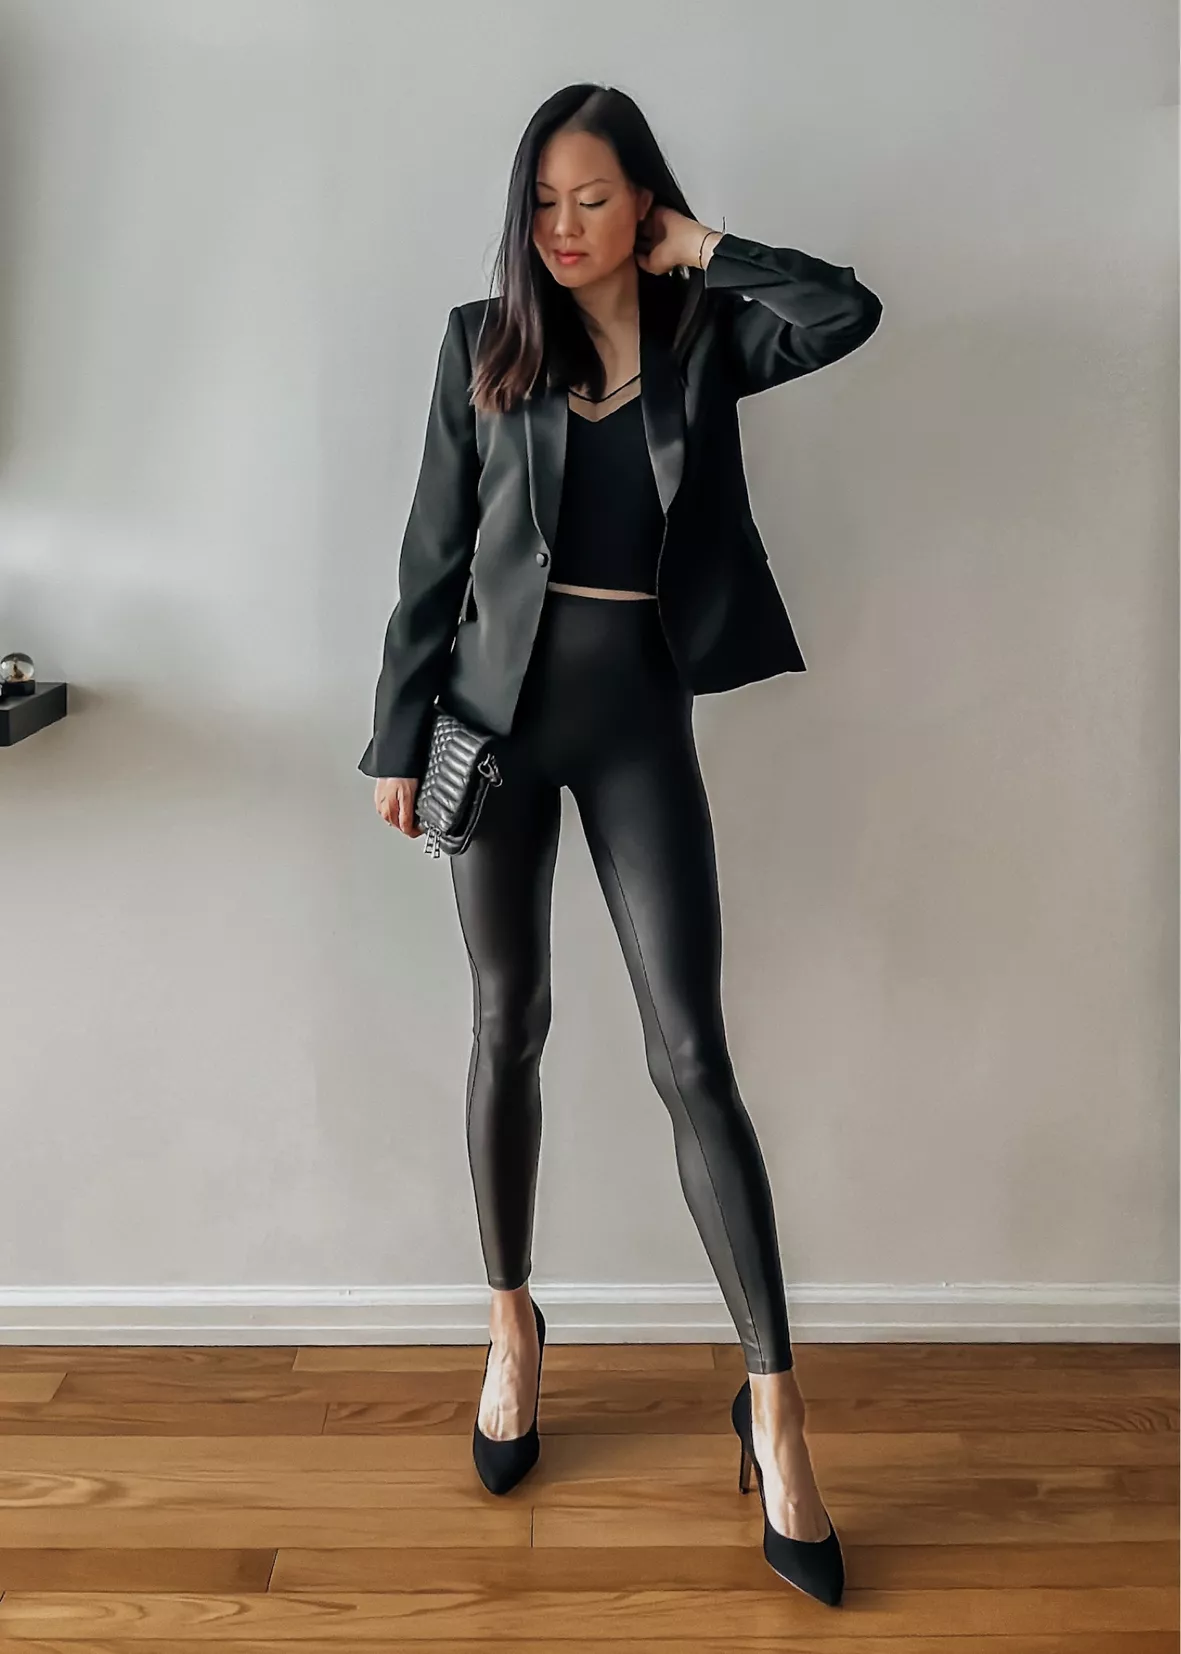 HOW TO STYLE LEATHER LEGGINGS, NIGHT OUT OUTFIT IDEAS